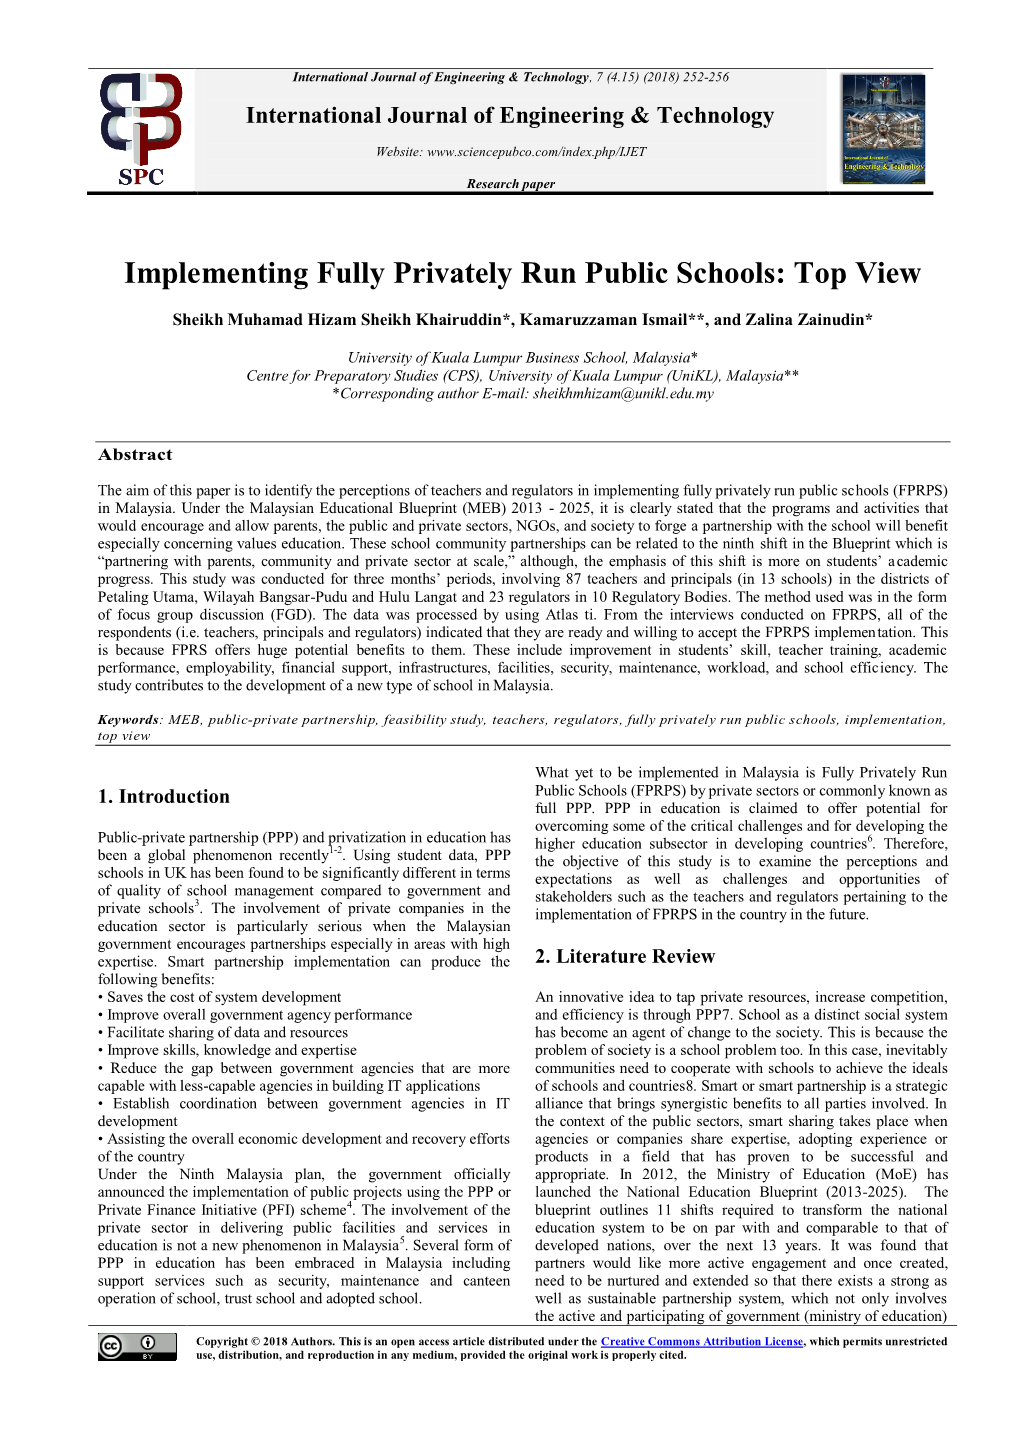 Implementing Fully Privately Run Public Schools: Top View